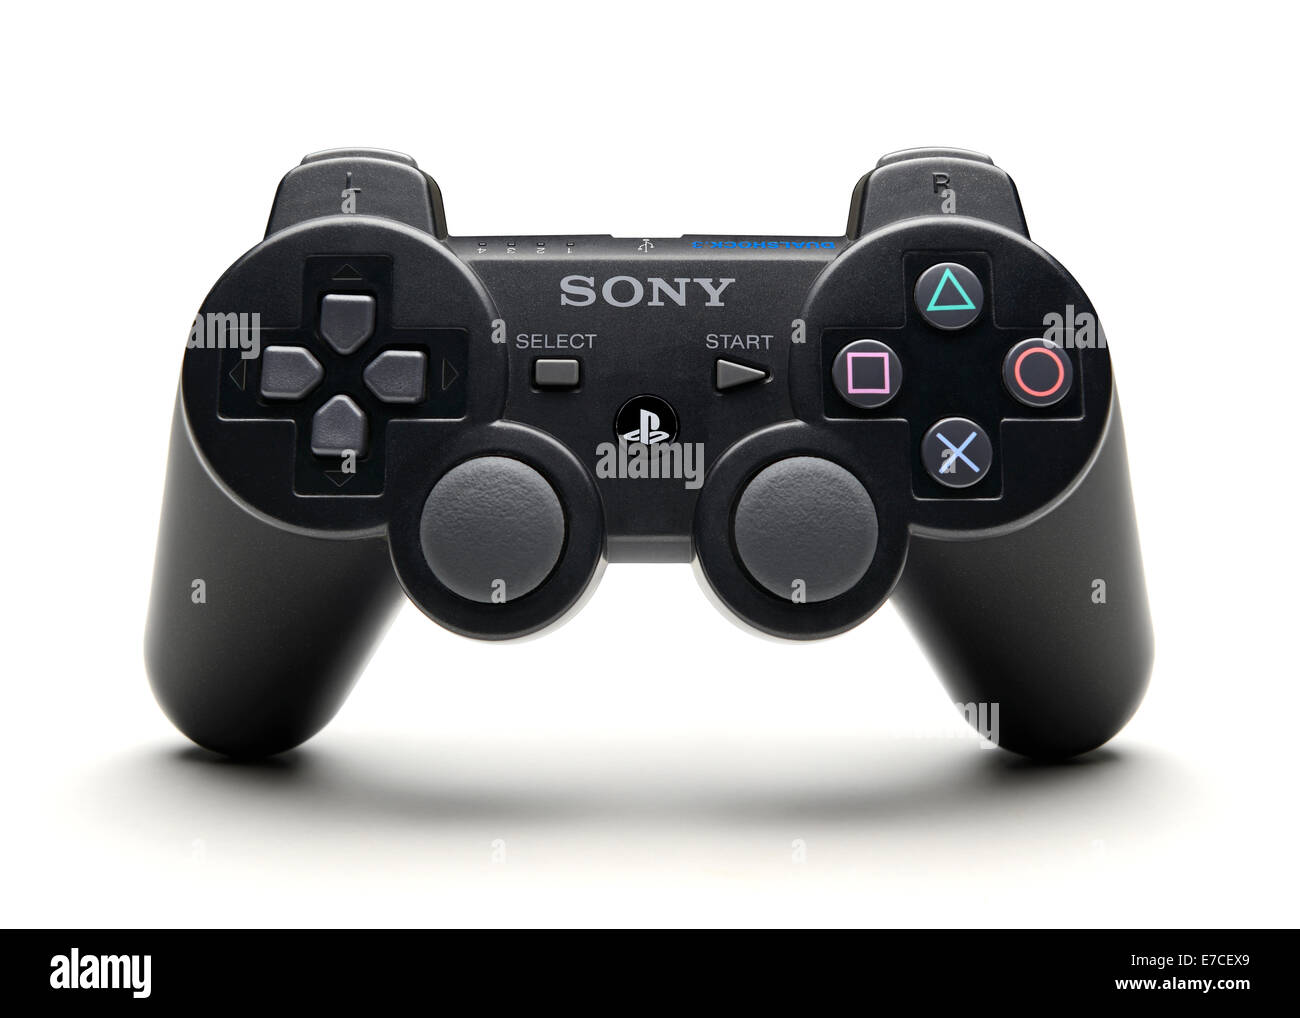 Sony-Playstation-Game-Controller. Stockfoto